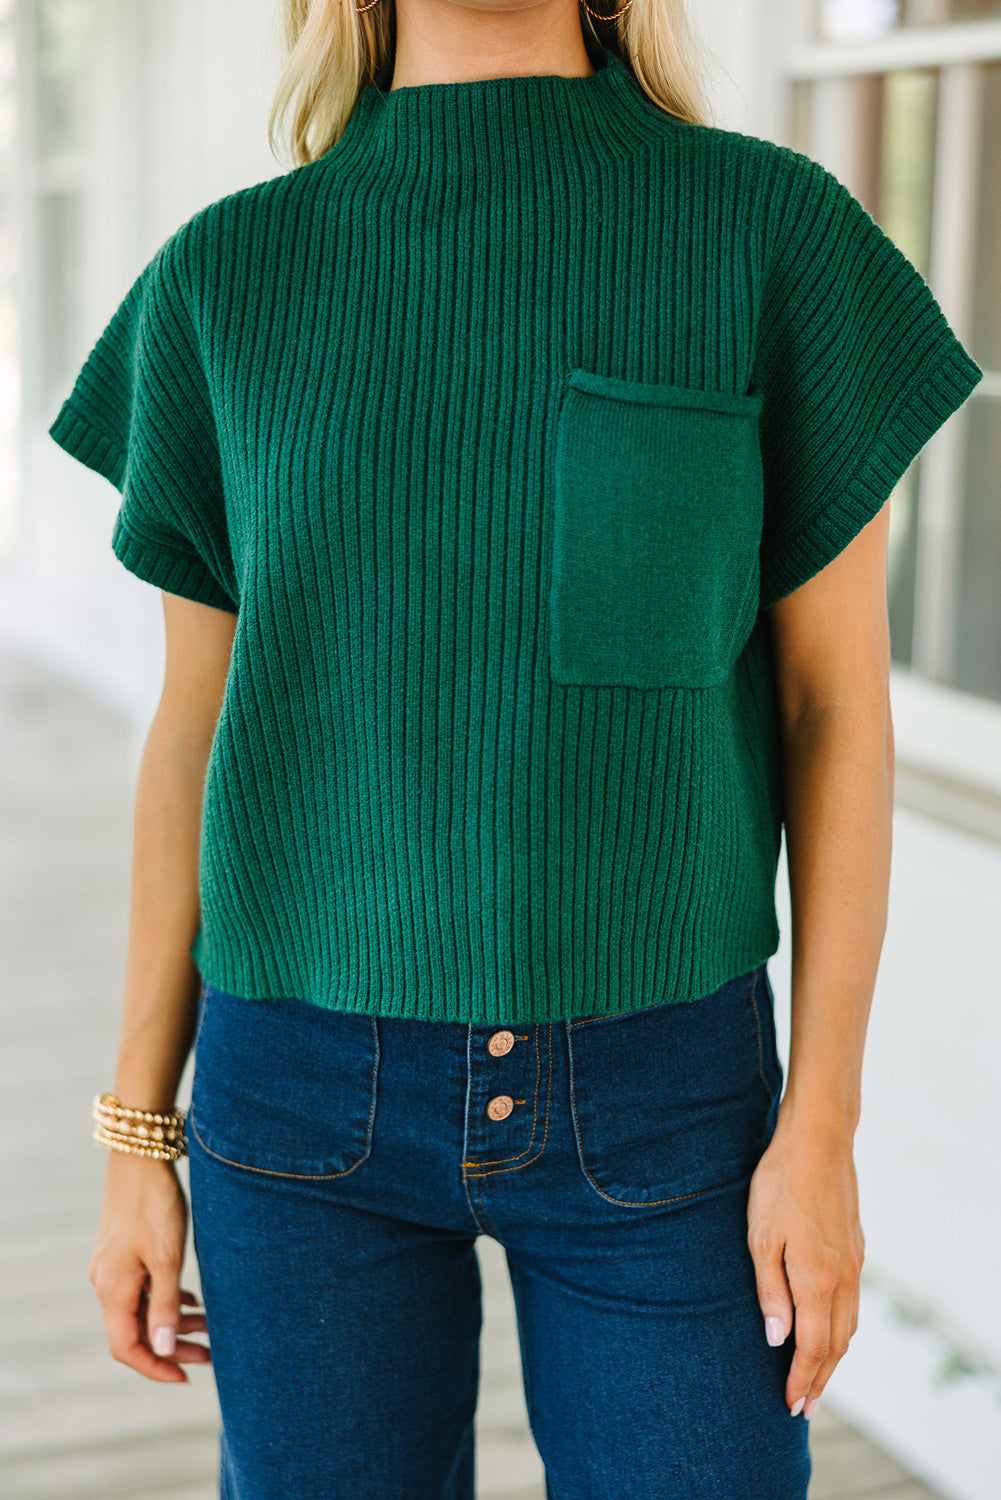 Blackish Green Patch Pocket Ribbed Knit Short Sleeve Sweater Pre Order Sweaters & Cardigans JT's Designer Fashion